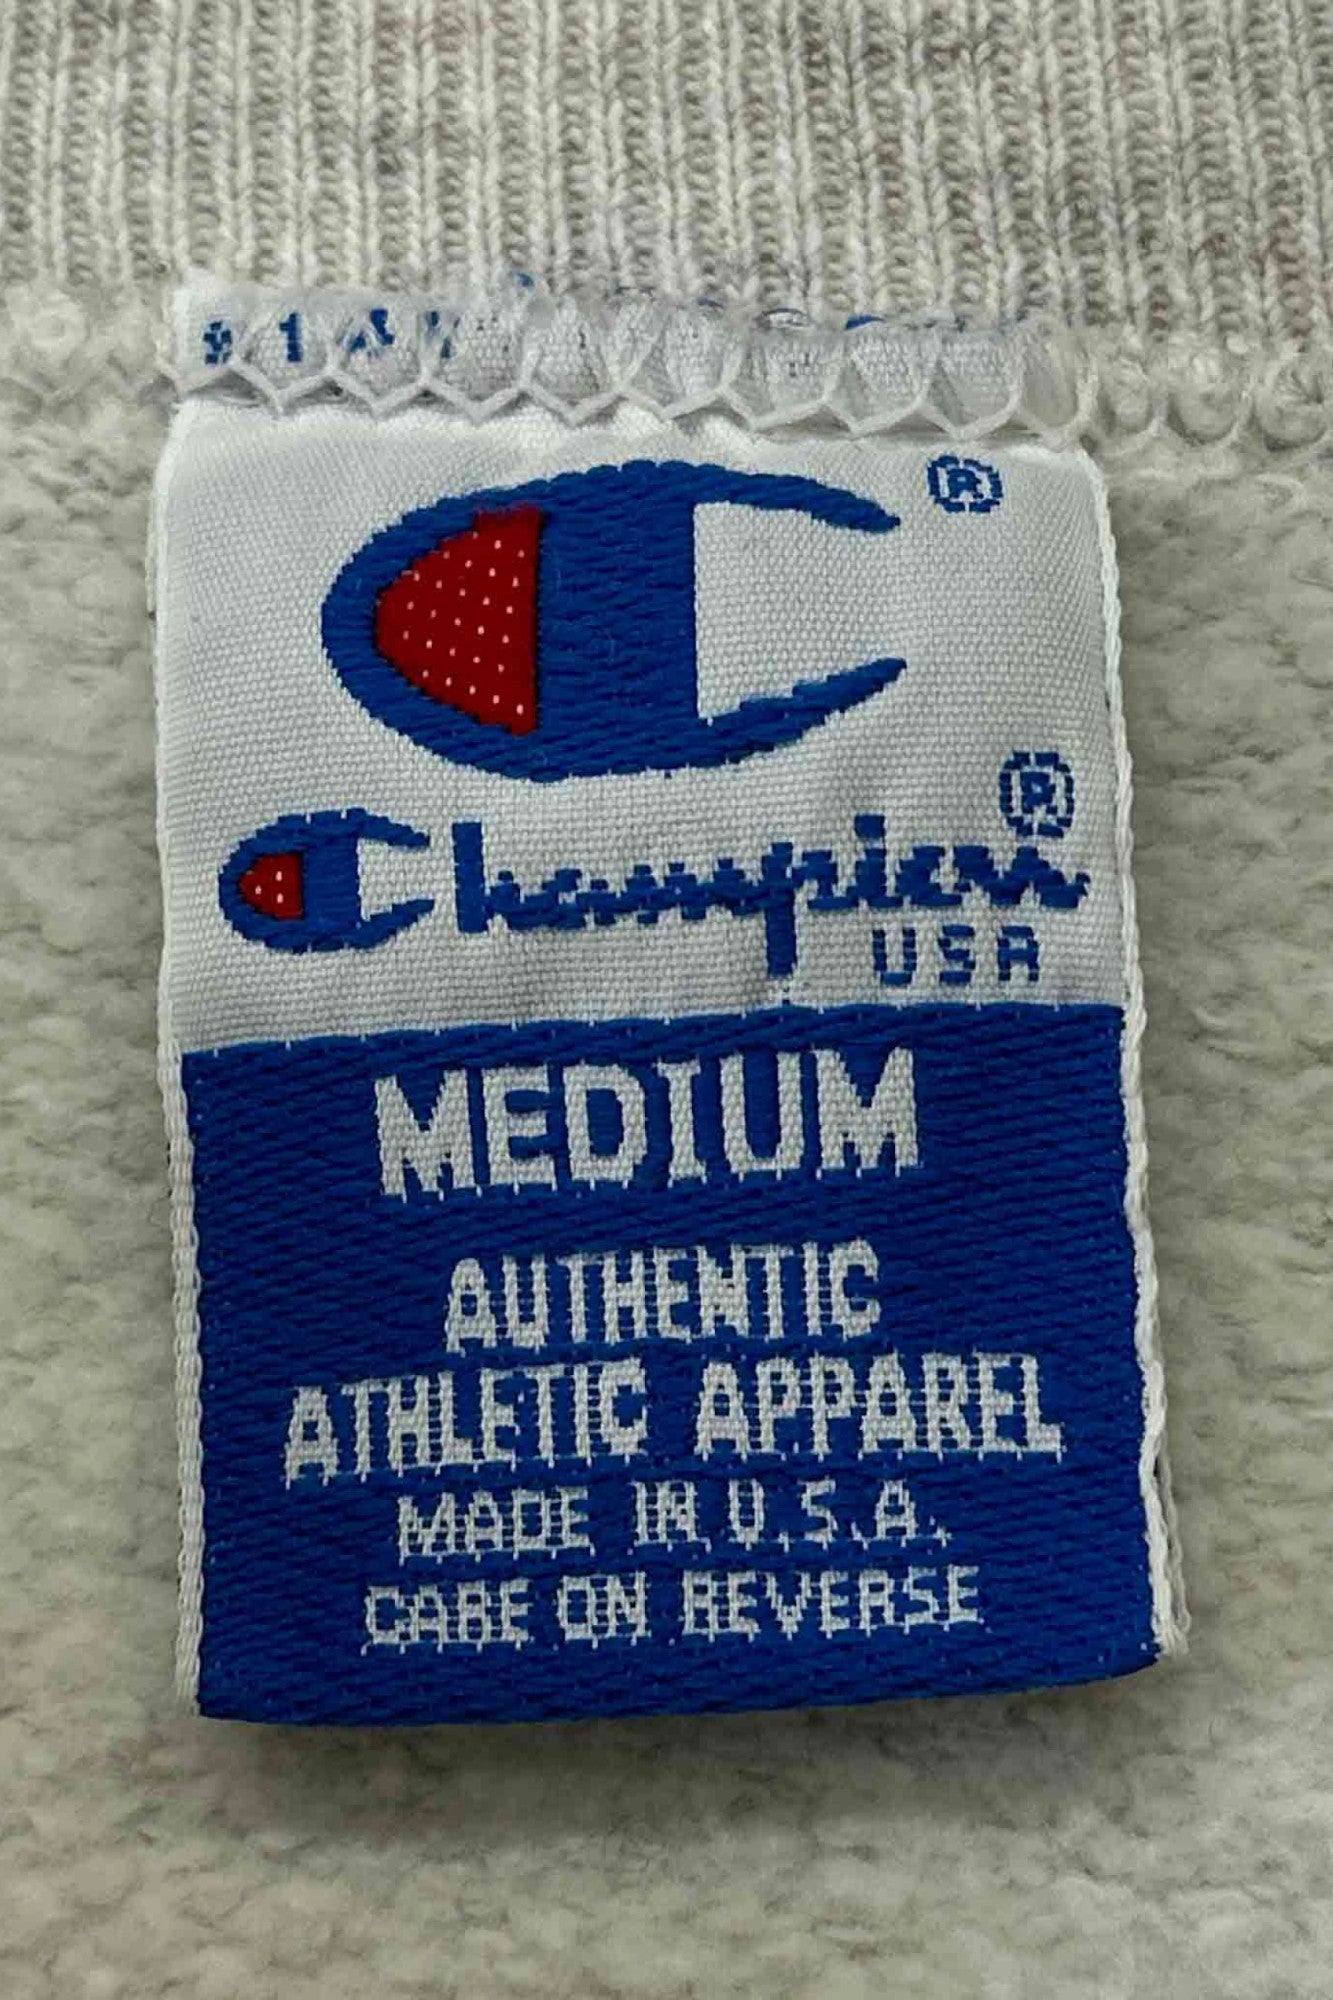 90's Made in USA Champion gray sweat